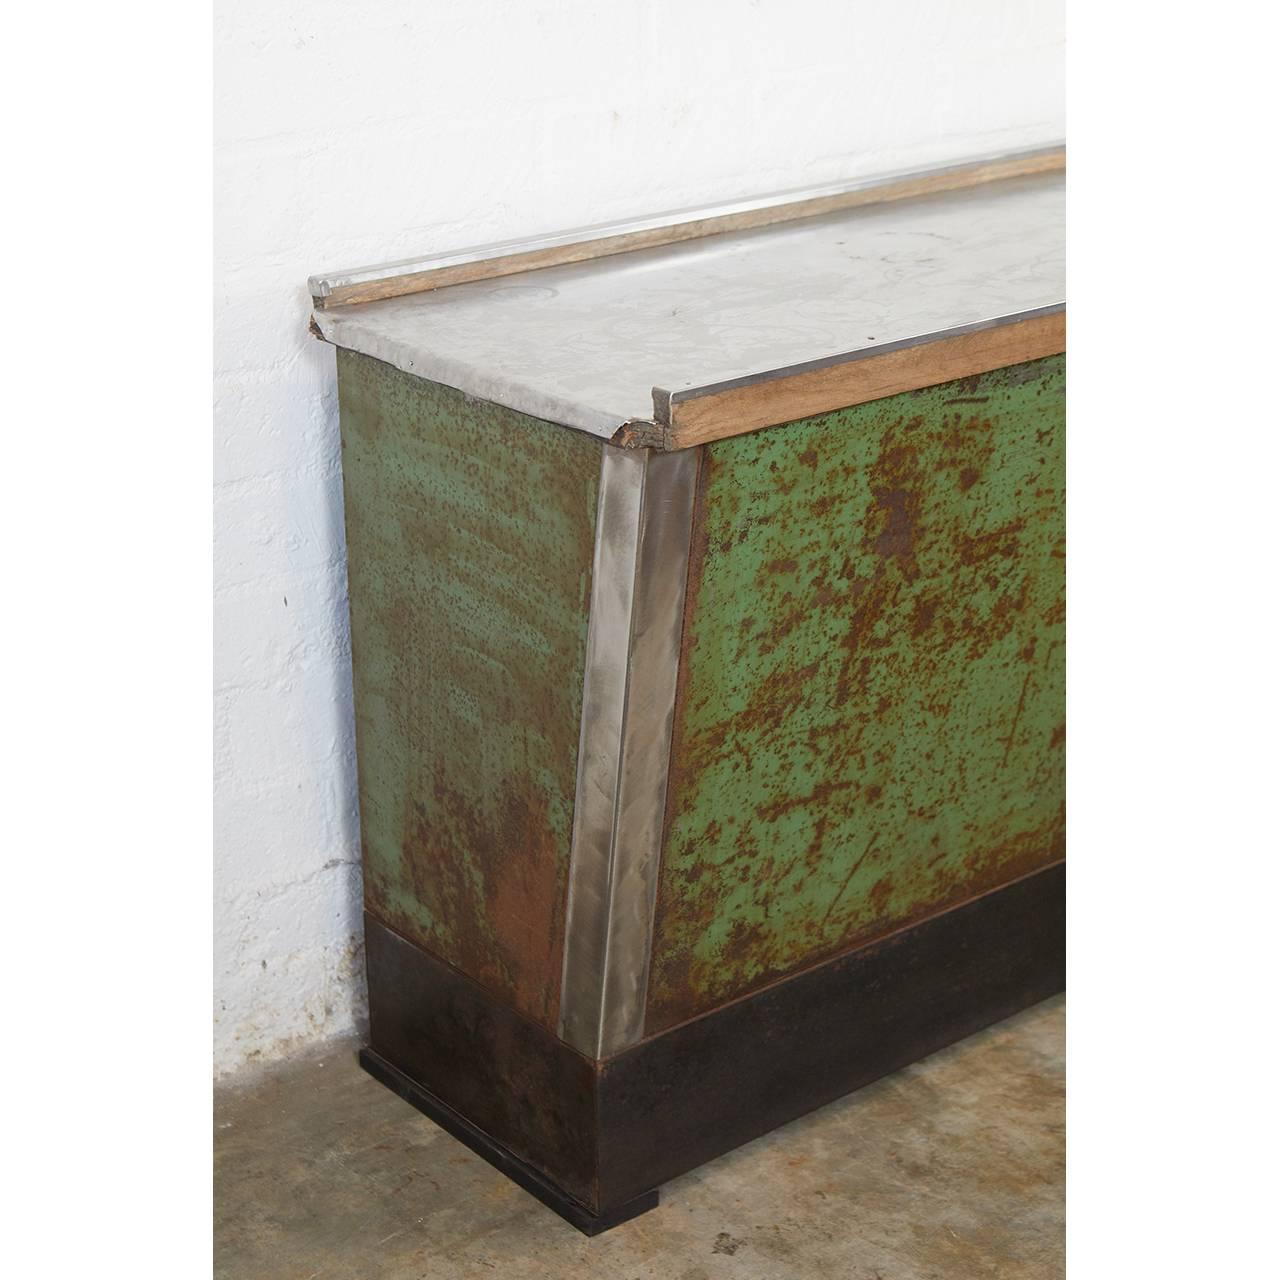 This American country store counter is from New England. From the distressed patina we assume that it was used as an outdoor porch counter. The piece tapers nicely from top to bottom and has two shelves at the back. The brushed stainless steel sheet